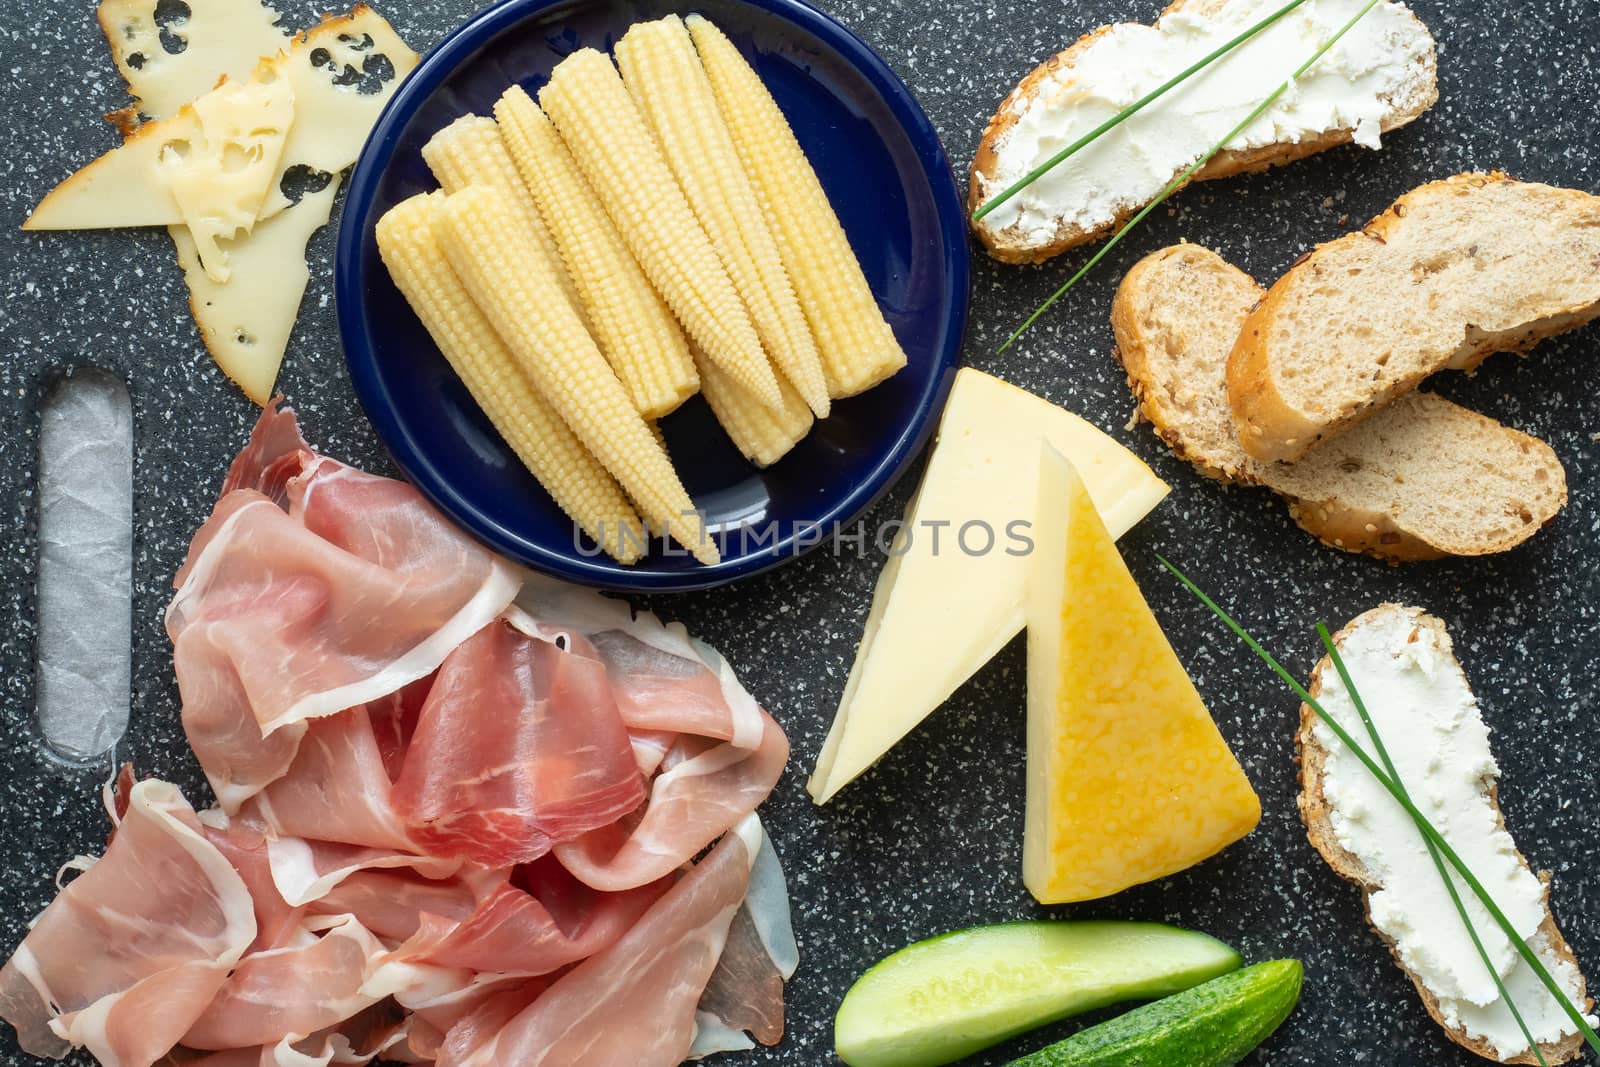 Cold appetizer. Cold cuts. Spicy food on black background, top view.